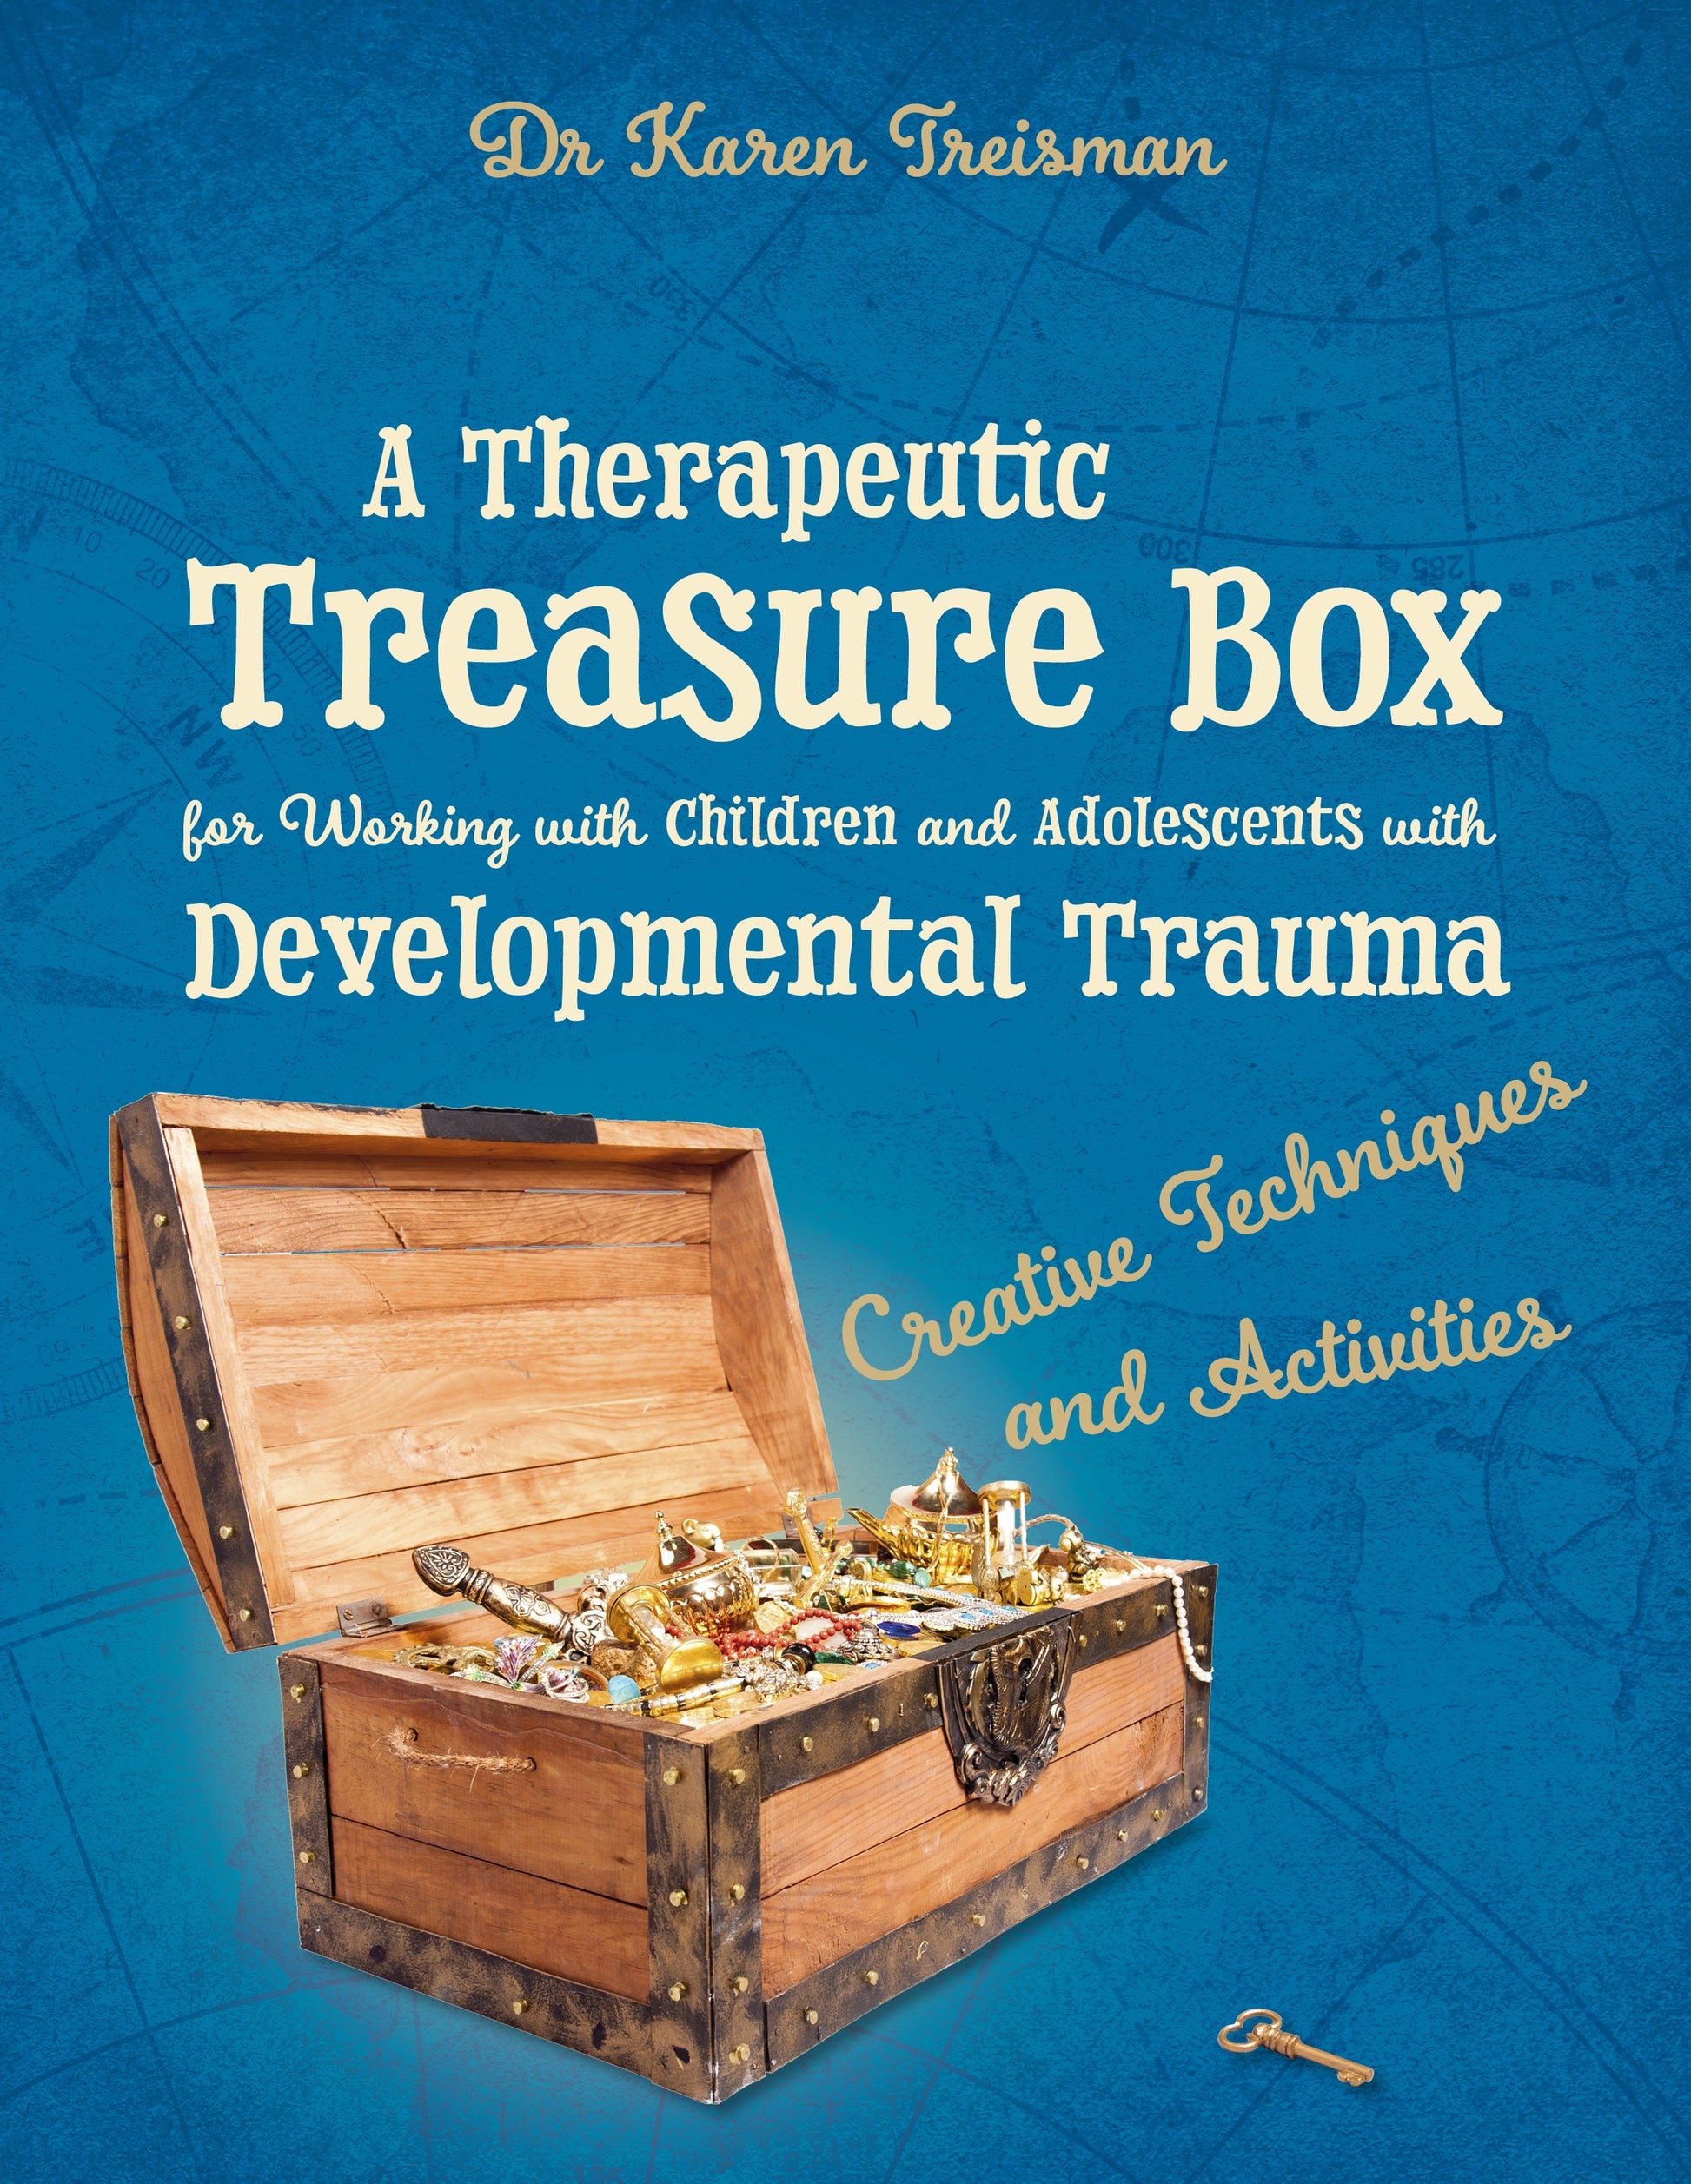 A Therapeutic Treasure Box for Working with Children and Adolescents with Developmental Trauma by Karen Treisman